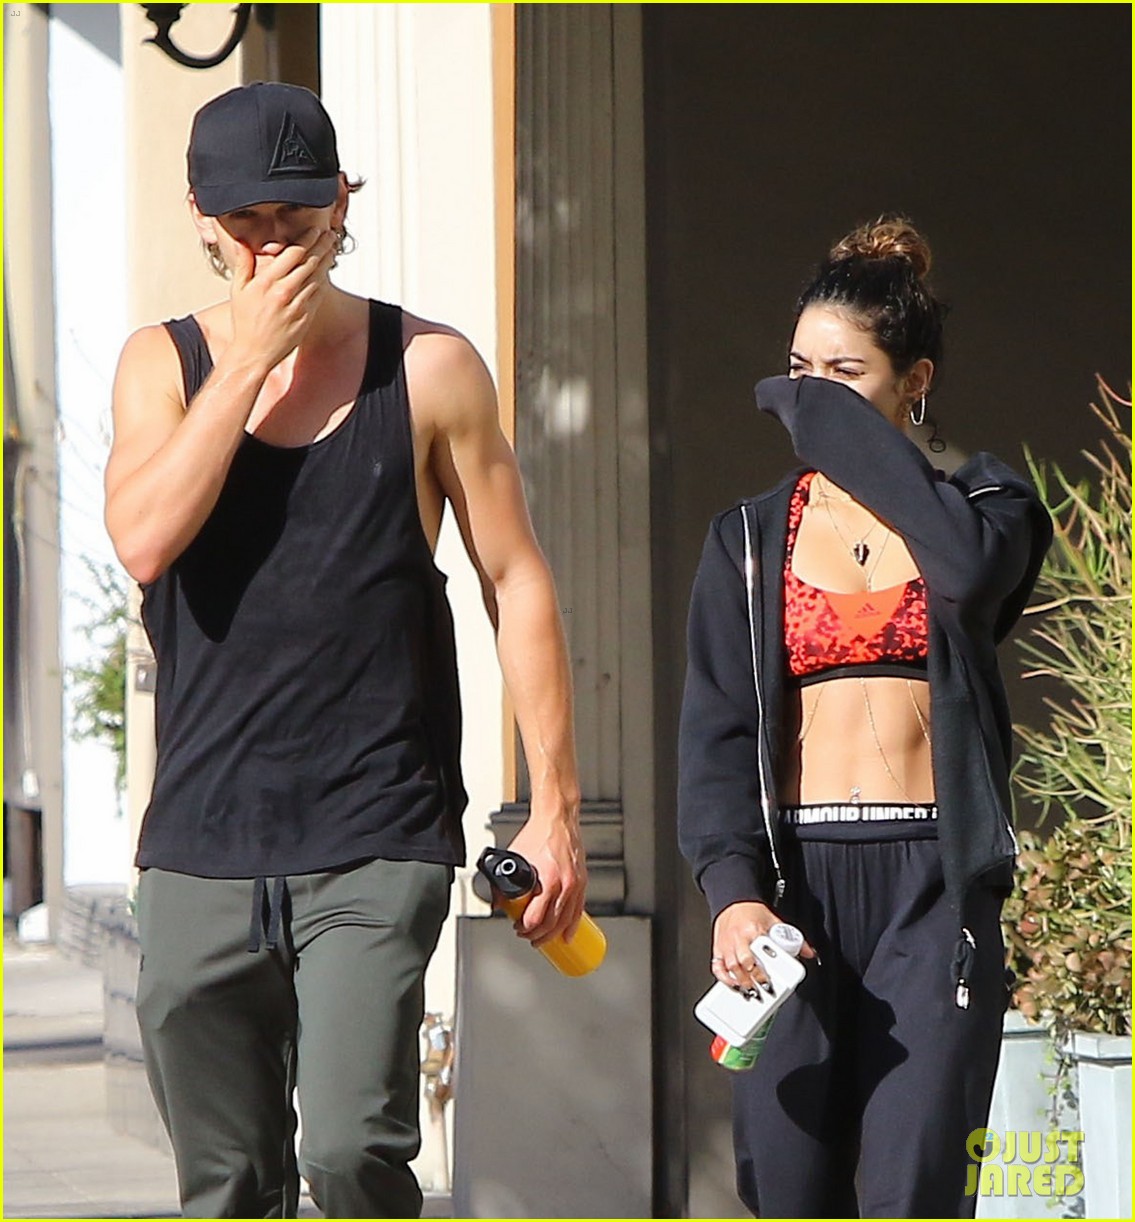 vanessa hudgens hits the gym after her halloween themed night 04